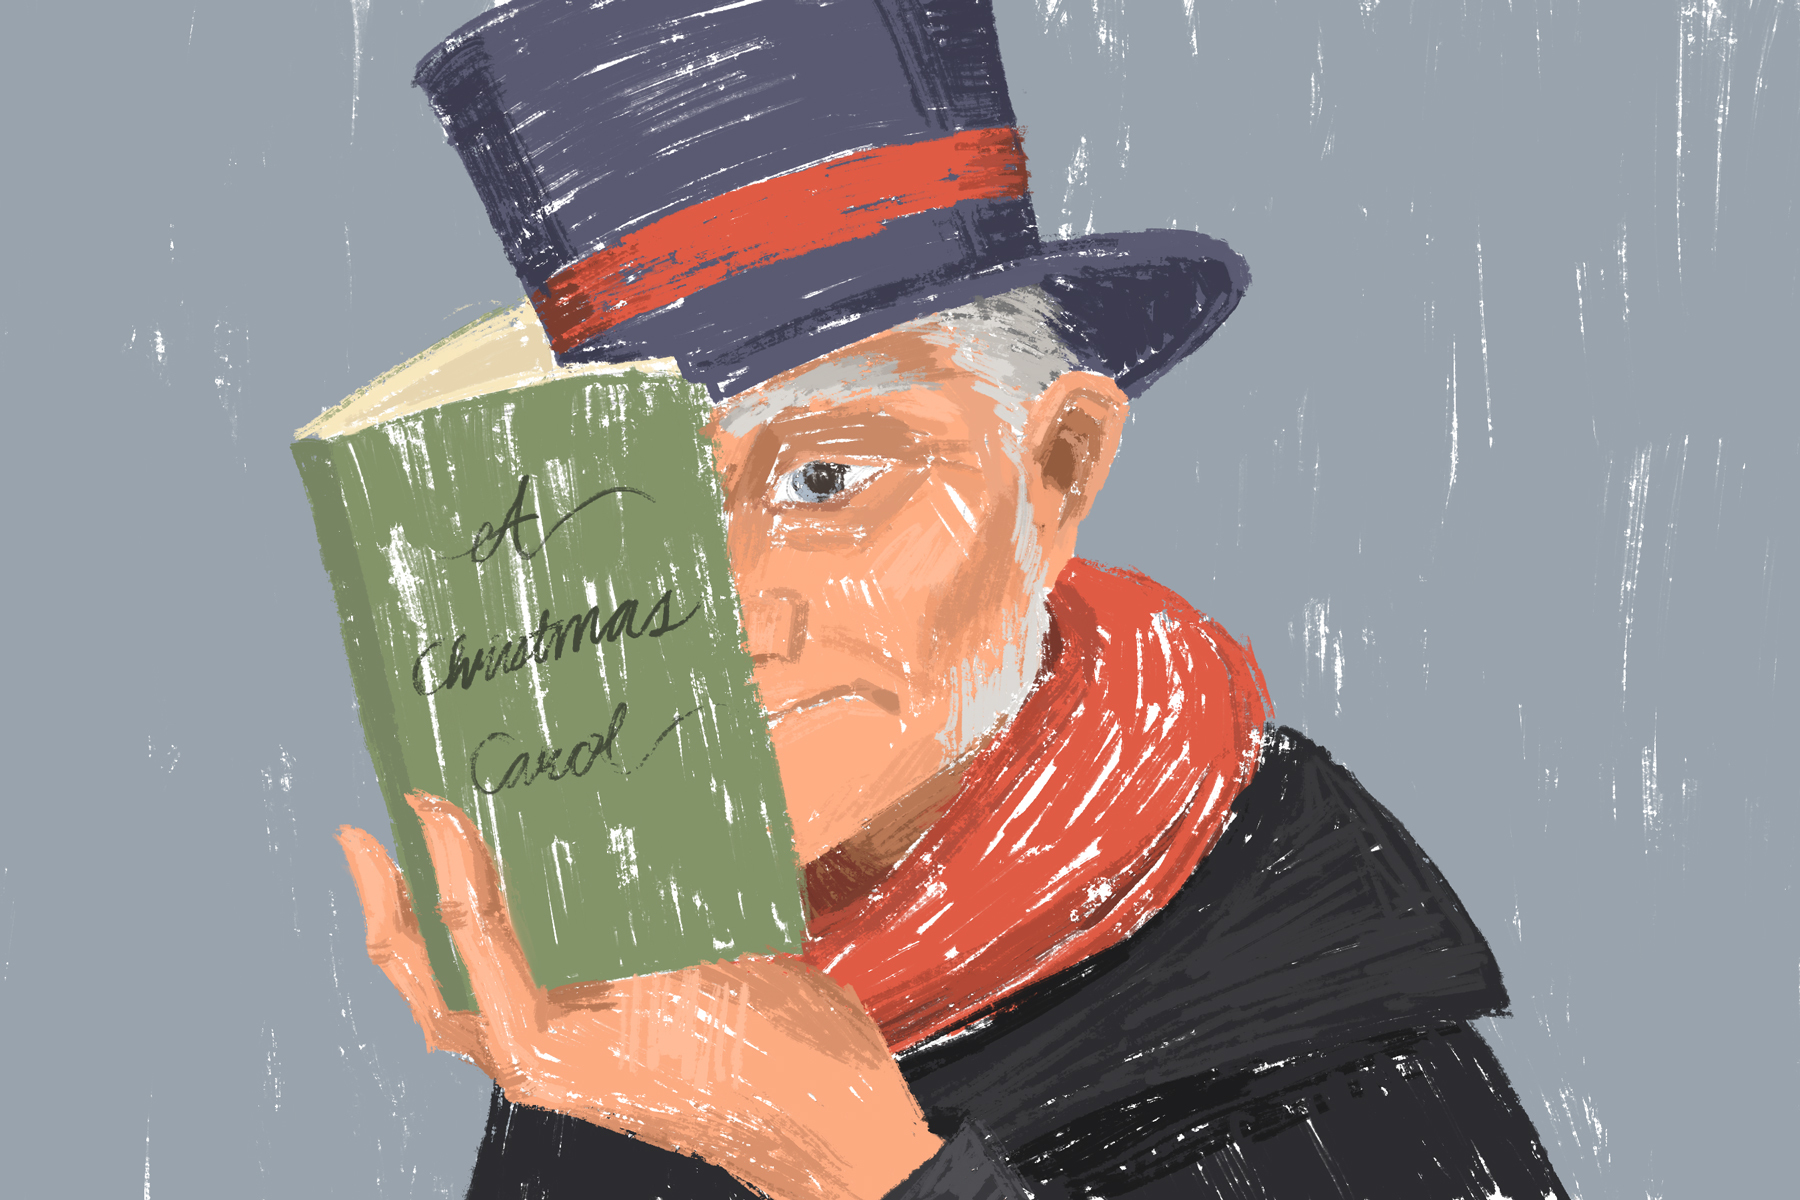 An illustration of Ebenezer Scrooge reading "A Christmas Carol" for an article about the impact of the iconic main character.